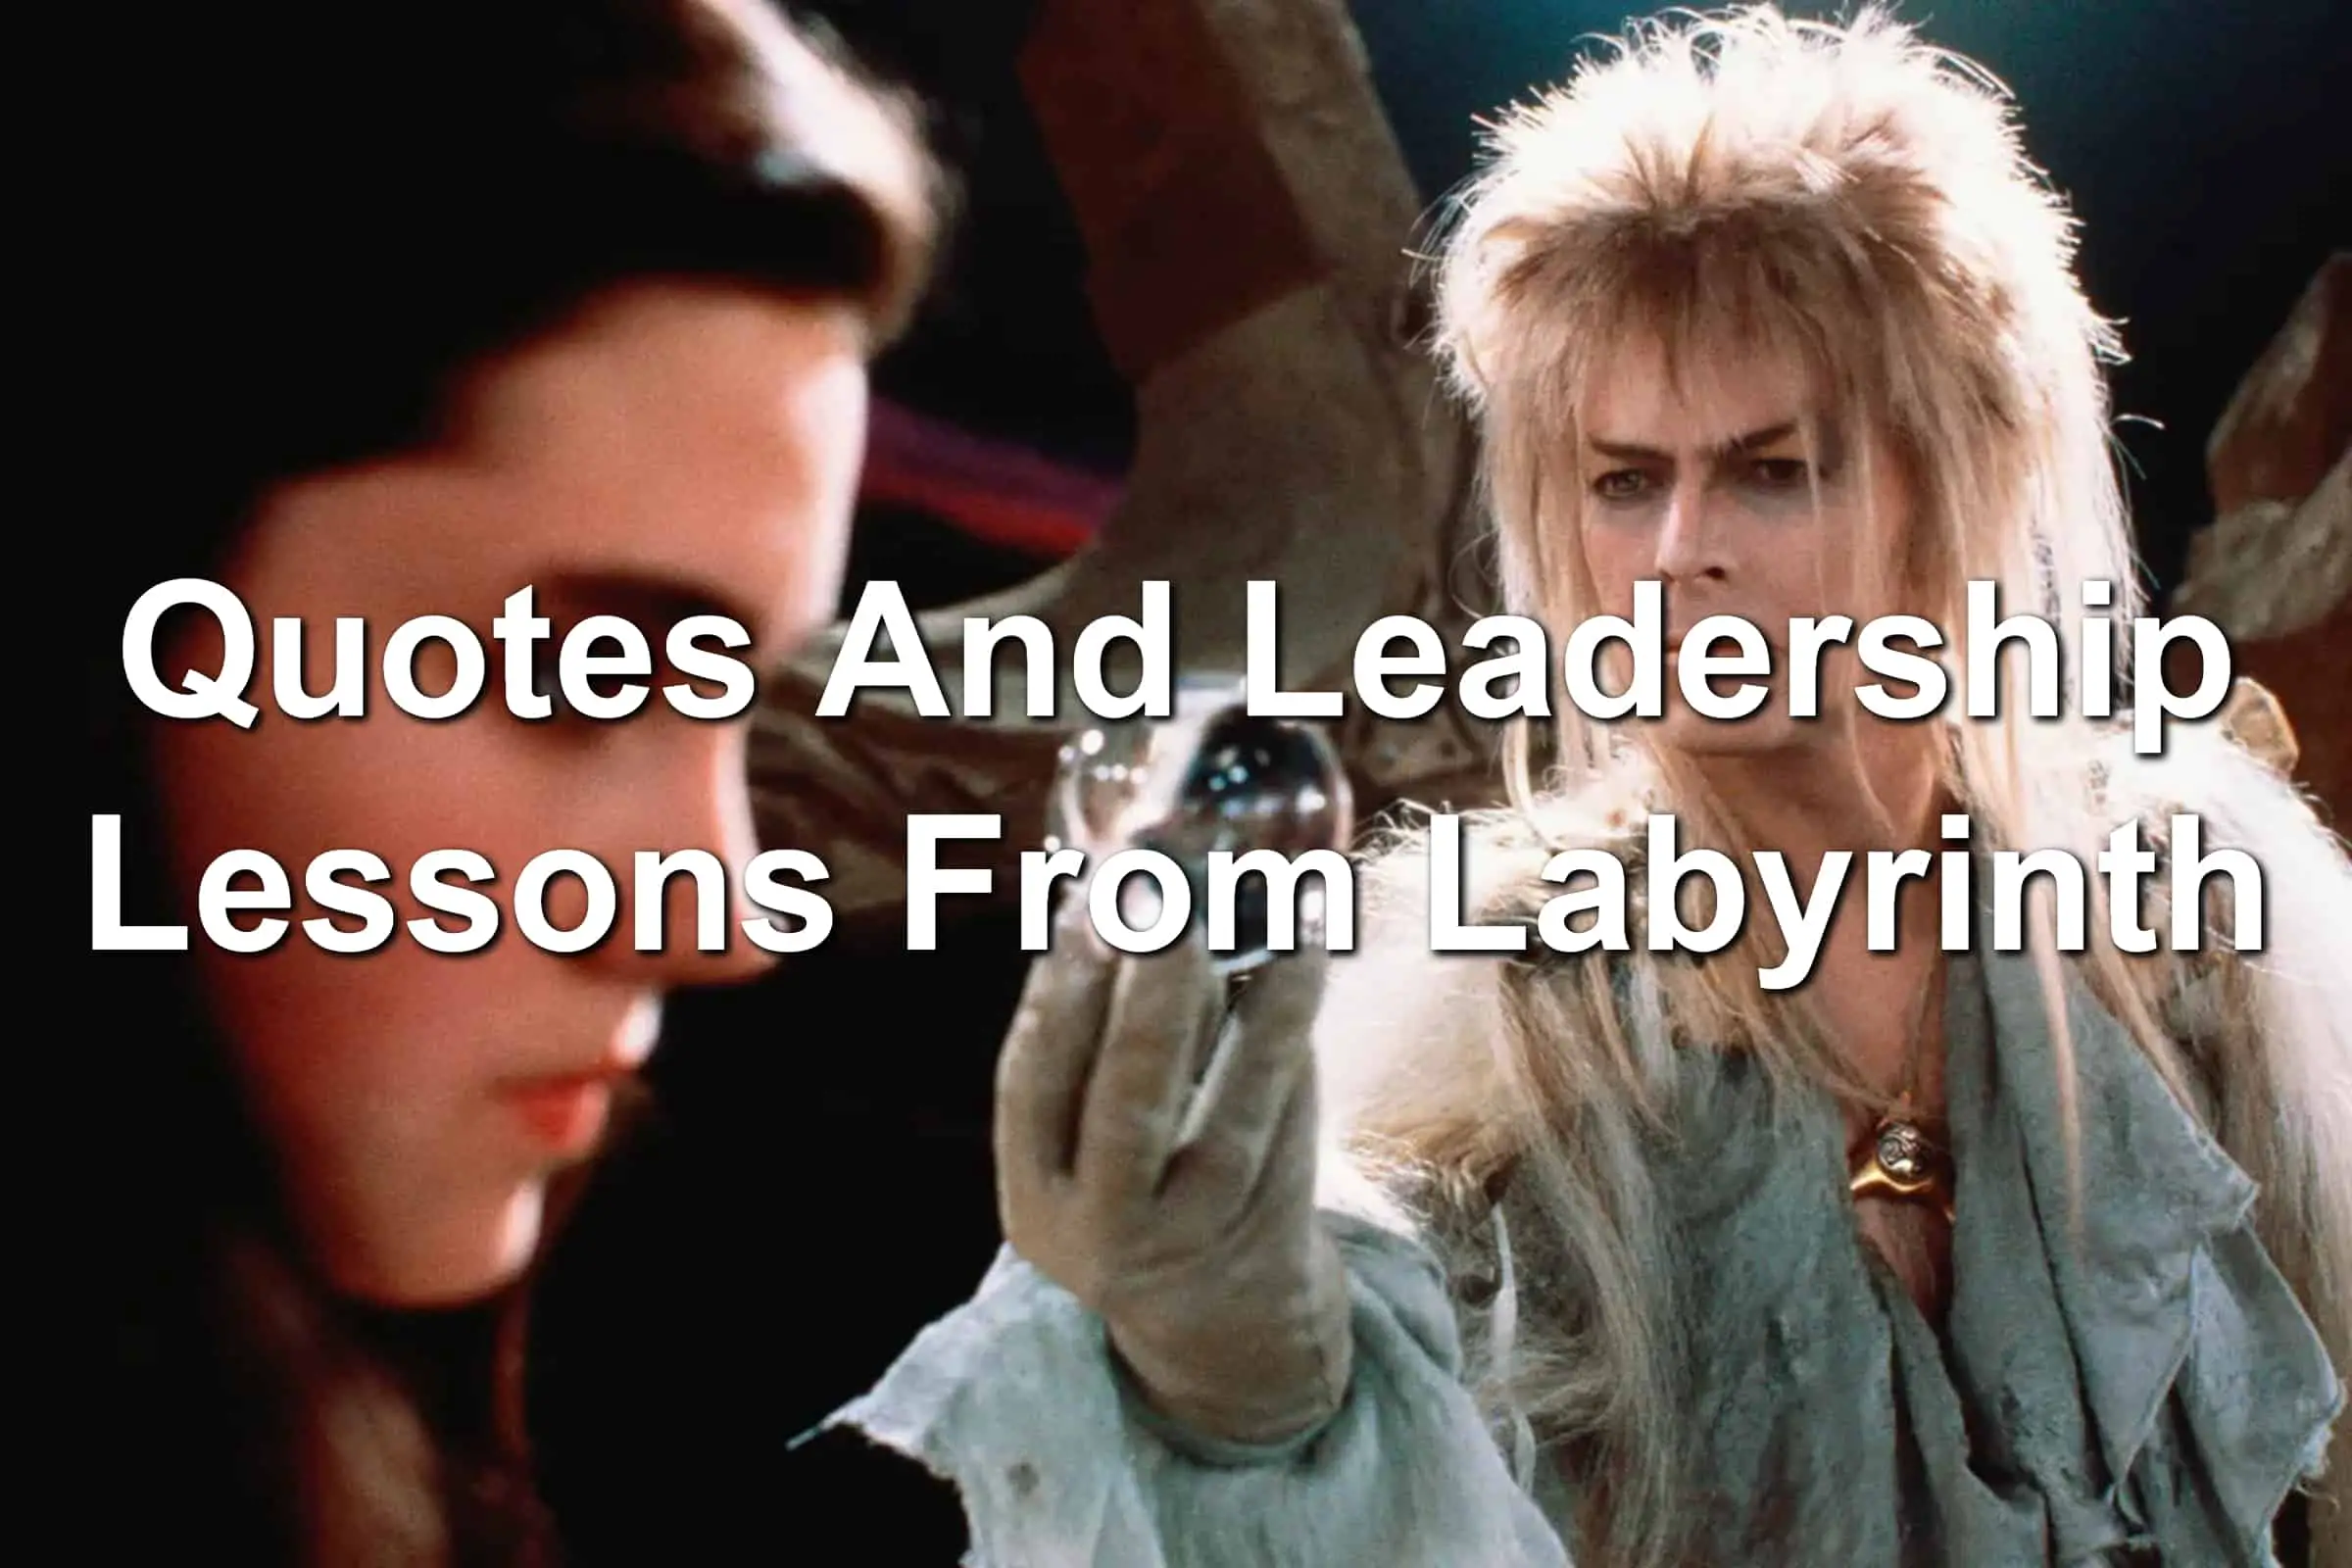 David Bowie and Jennifer Connelly in a scene from Labyrinth